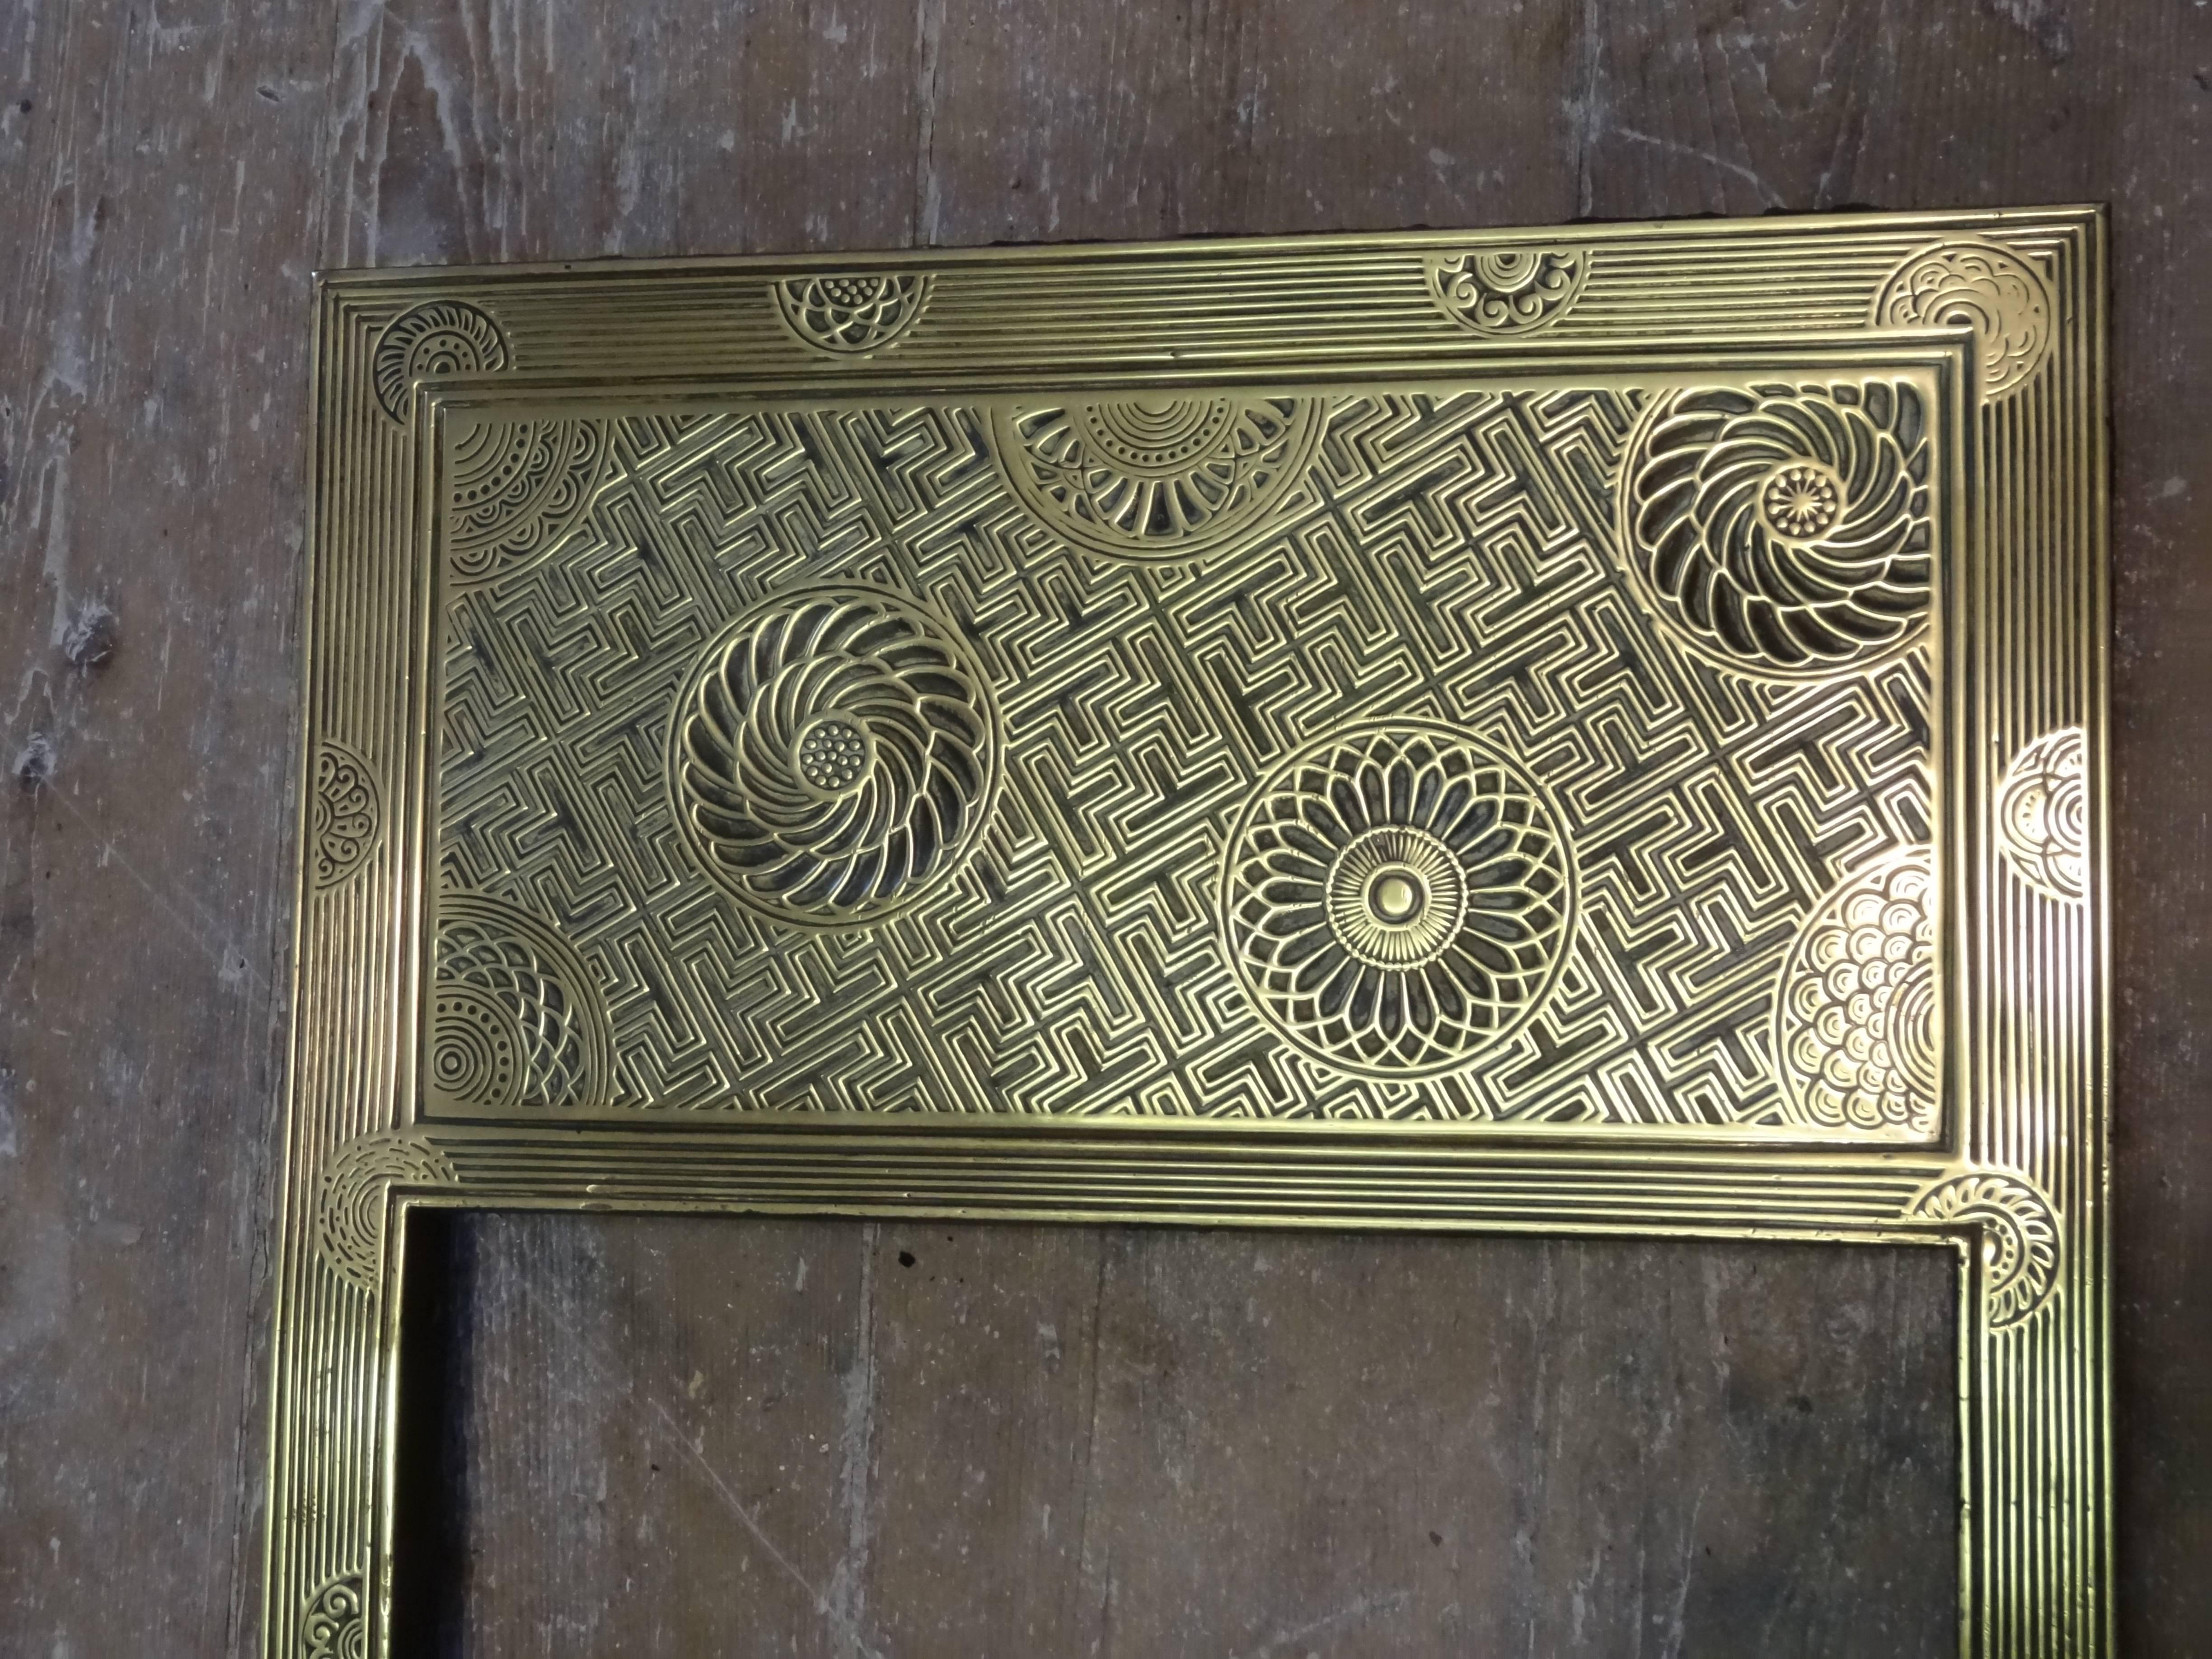 19th Century Thomas Jeckyll Brass and Iron Fire Surround Insert In Good Condition For Sale In Lurgan, Northern Ireland